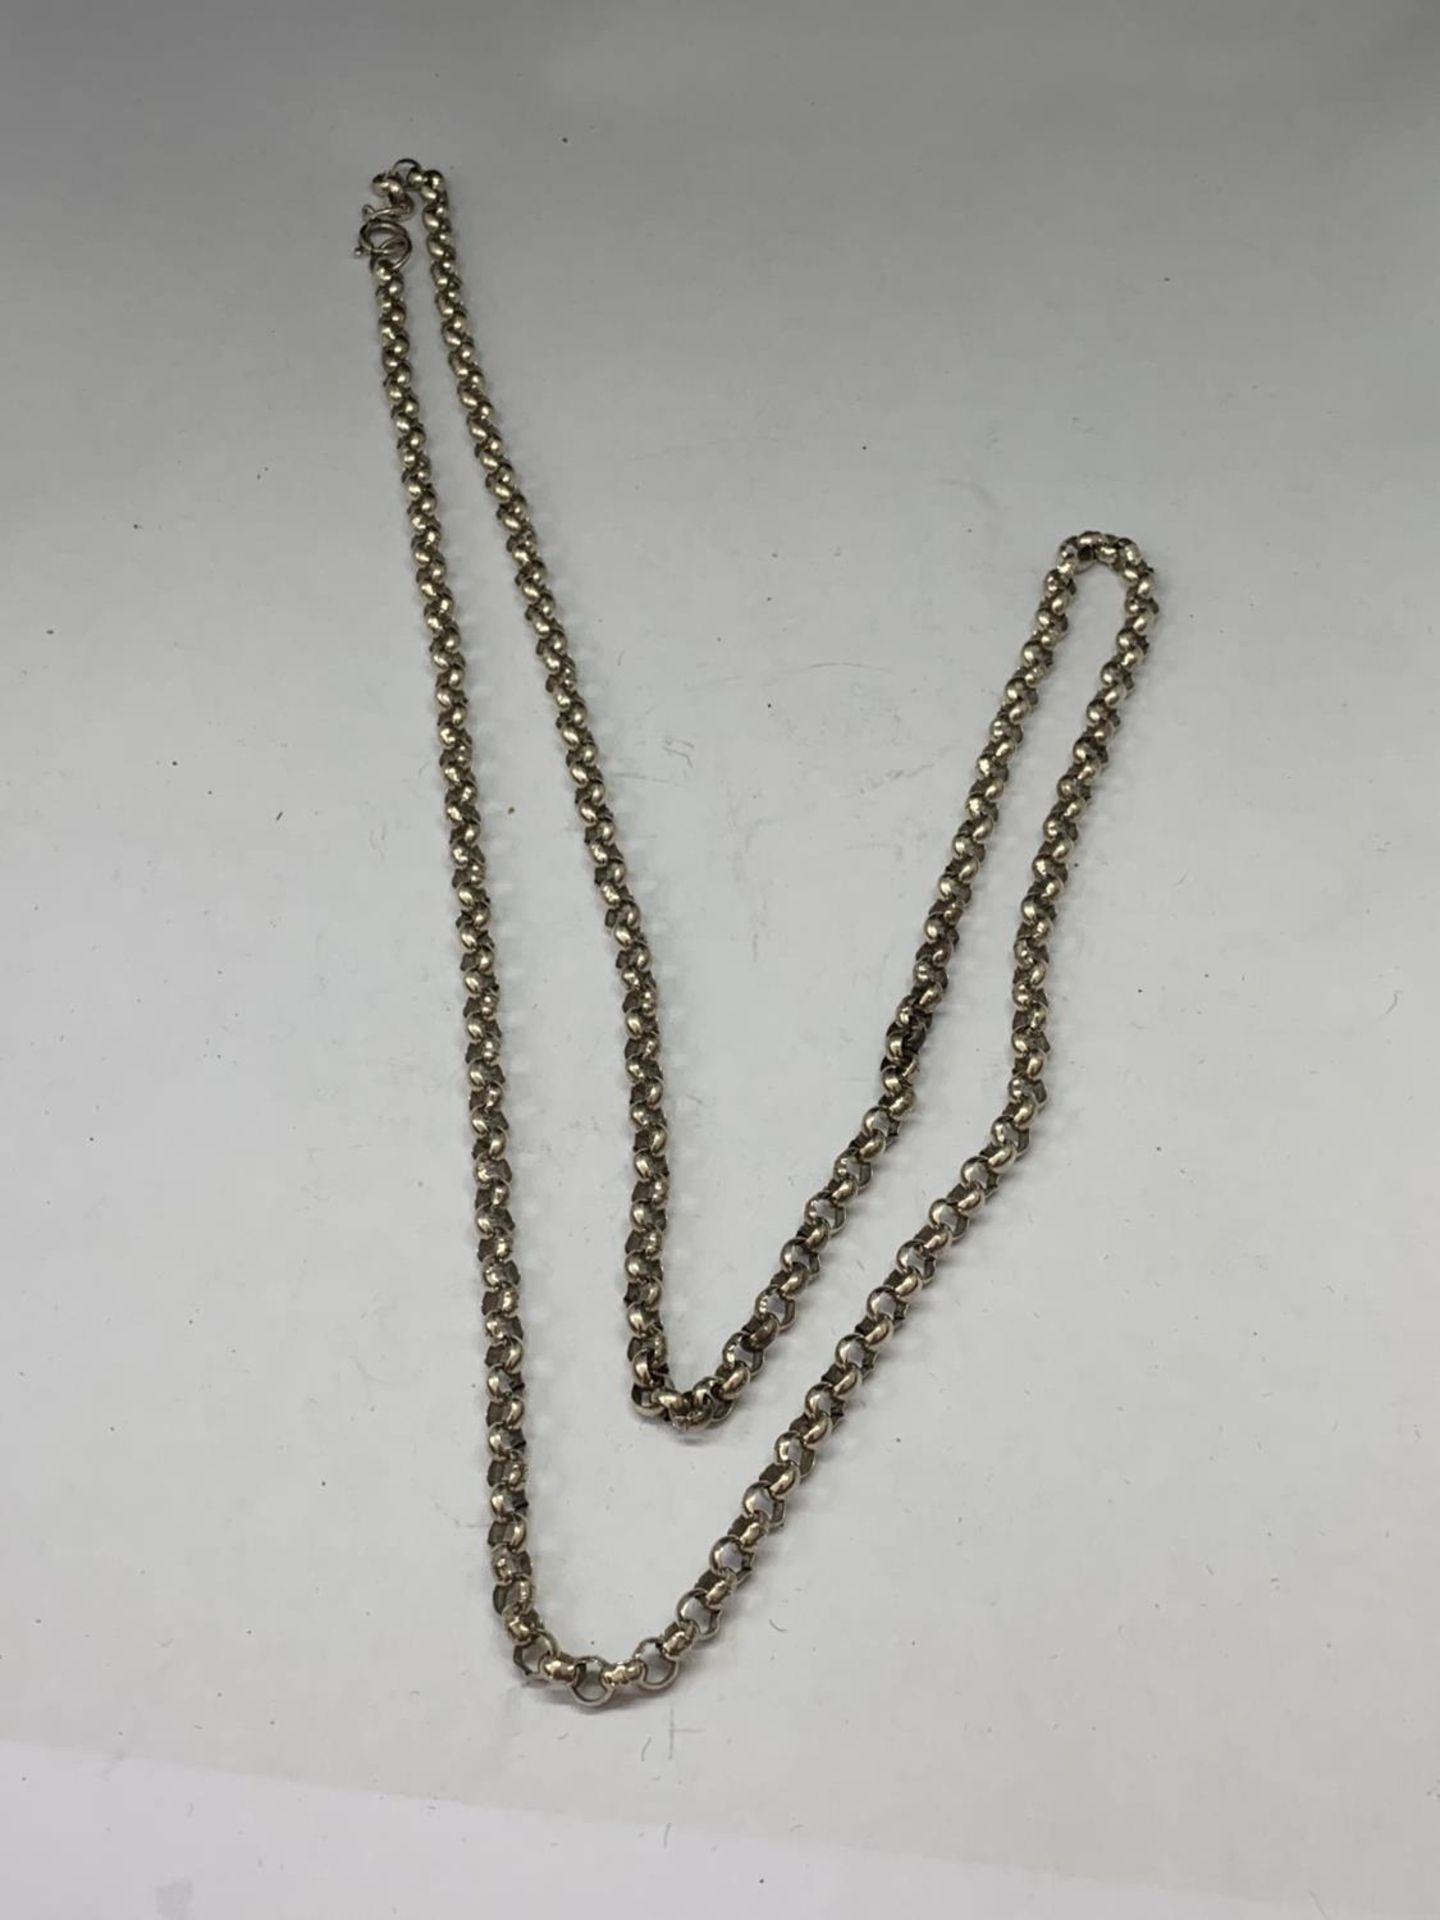 A SILVER BELCHER CHAIN NECKLACE LENGTH 28"